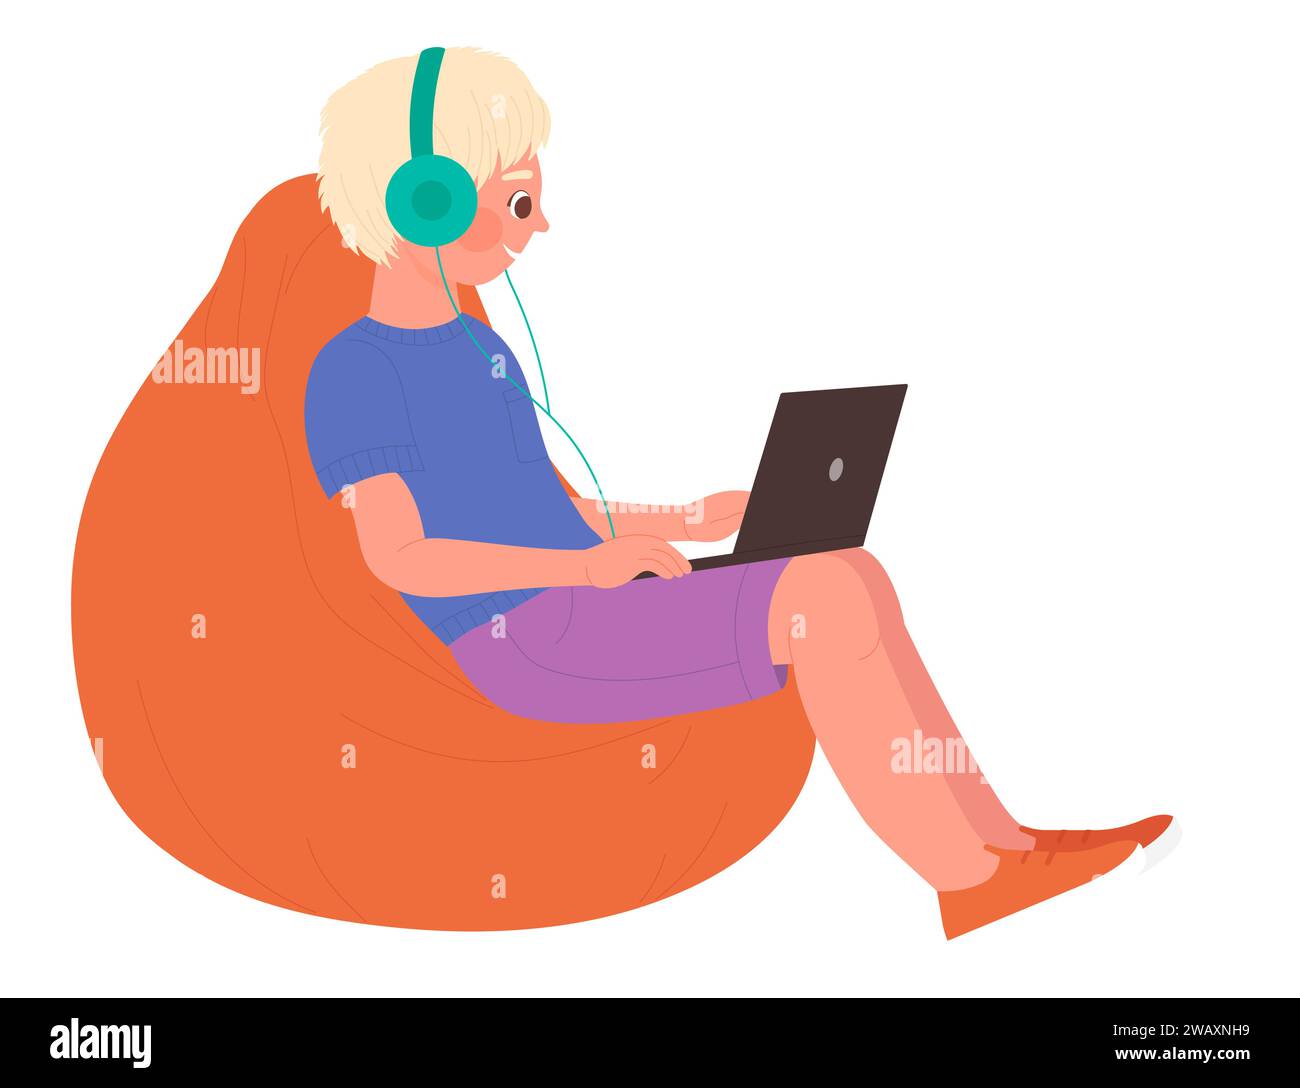 Kids using mobile phones, tablet and laptop for online games and study vector illustration. Cartoon happy friends sitting on couch in home interior background. Internet addiction problem concept Stock Vector